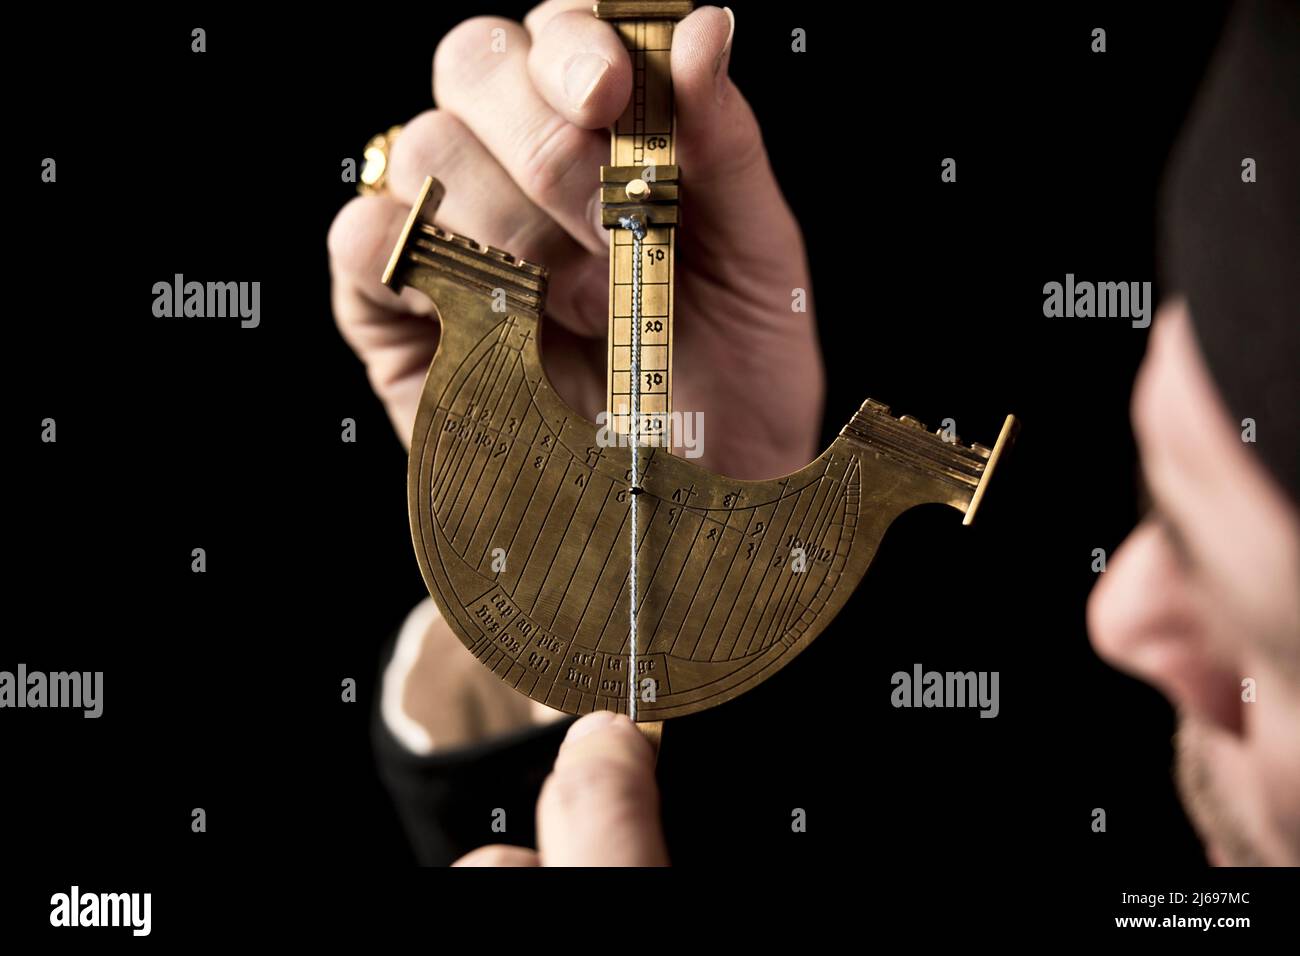 Replica of a 14th Navicula de Venetiis (‘Little ship from Venice’), a brass measuring instrument used for navigation and by early astronomers. Stock Photo